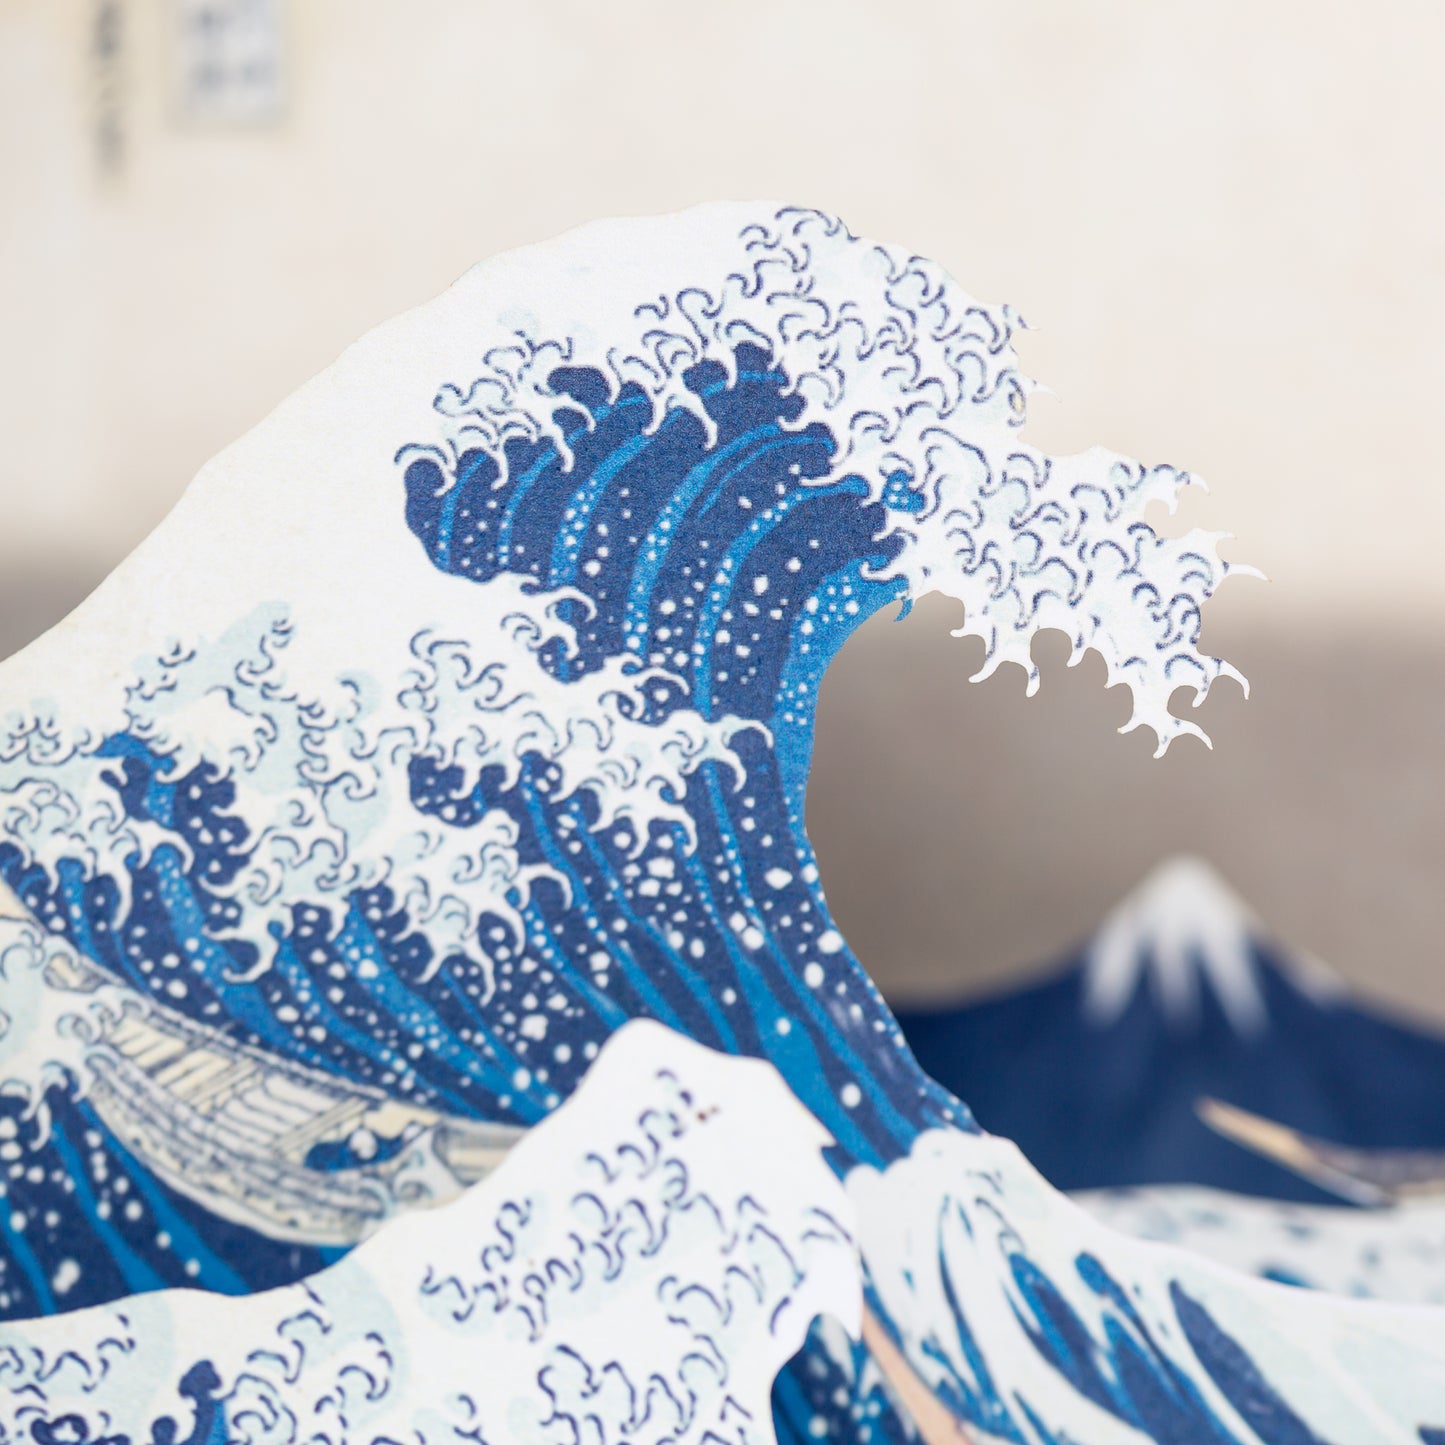 Pop Up Card- The Great Wave